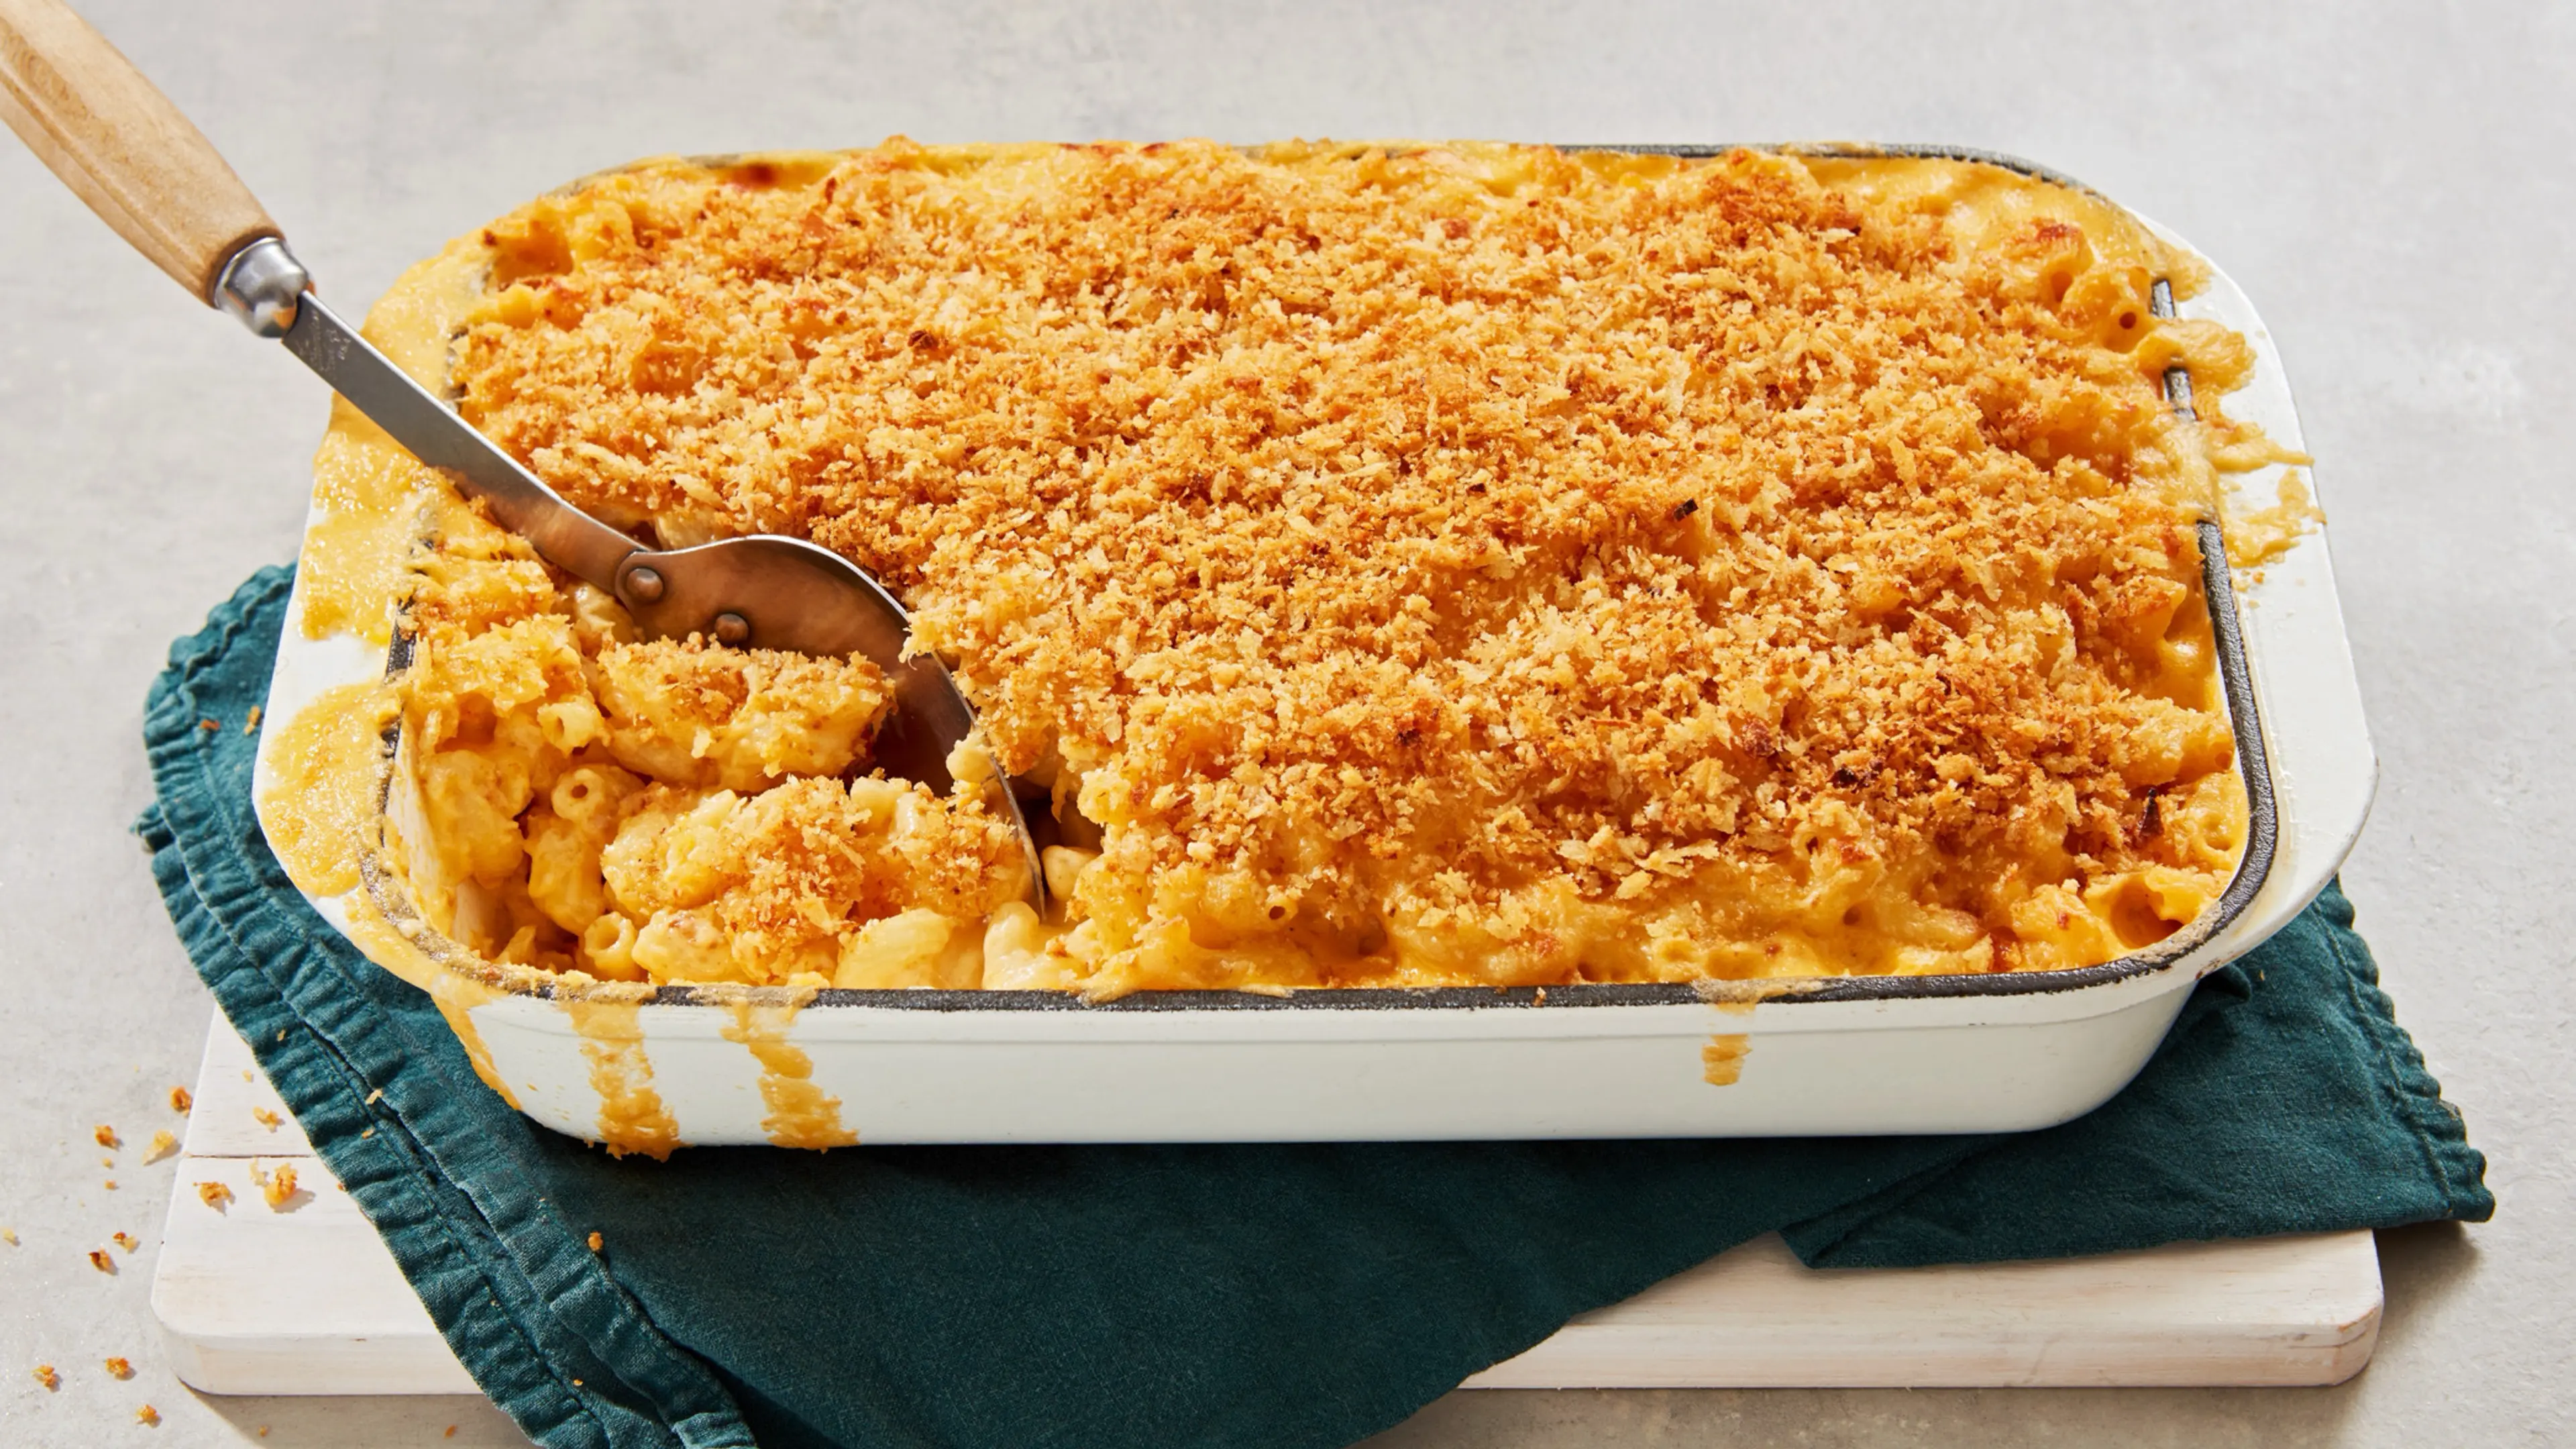 The Very Best Mac and Cheese